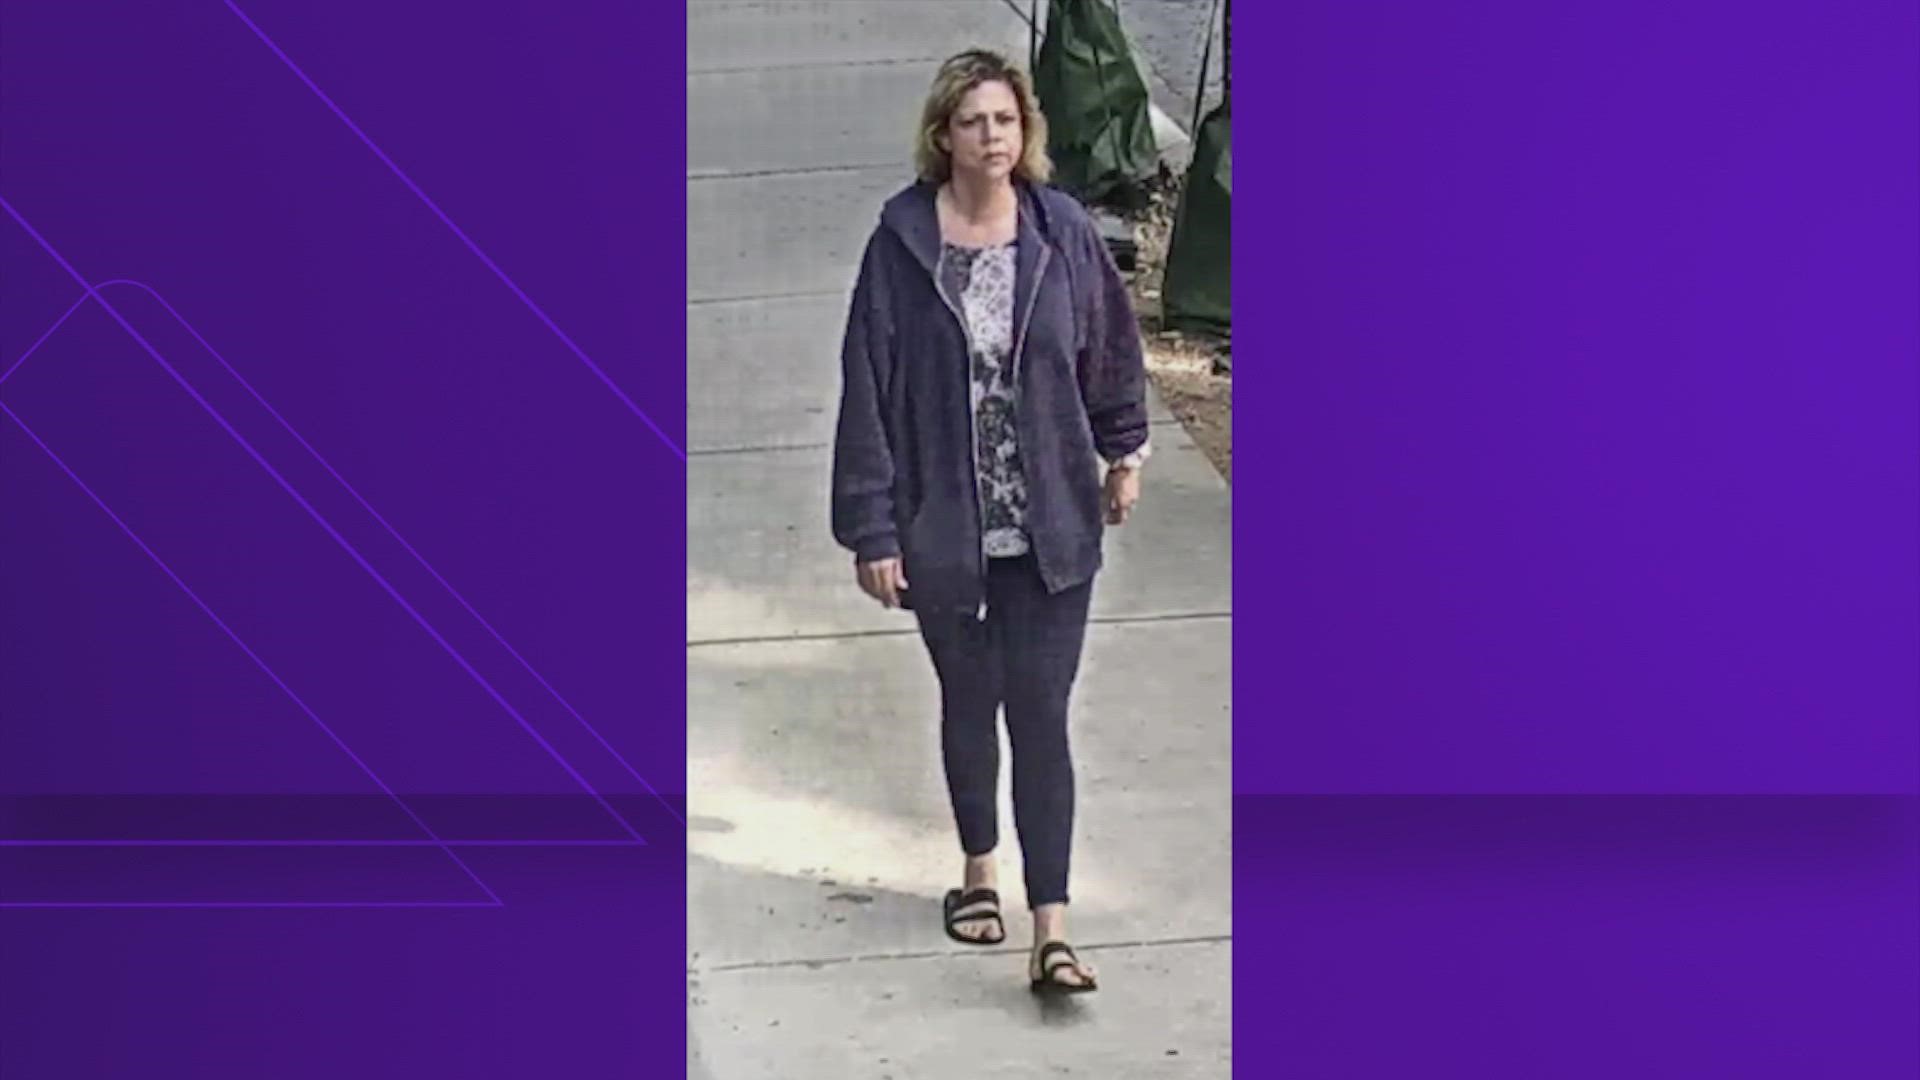 Texas EquuSearch released a new photo of the missing Alvin woman walking in New Orleans the day after she was last seen.